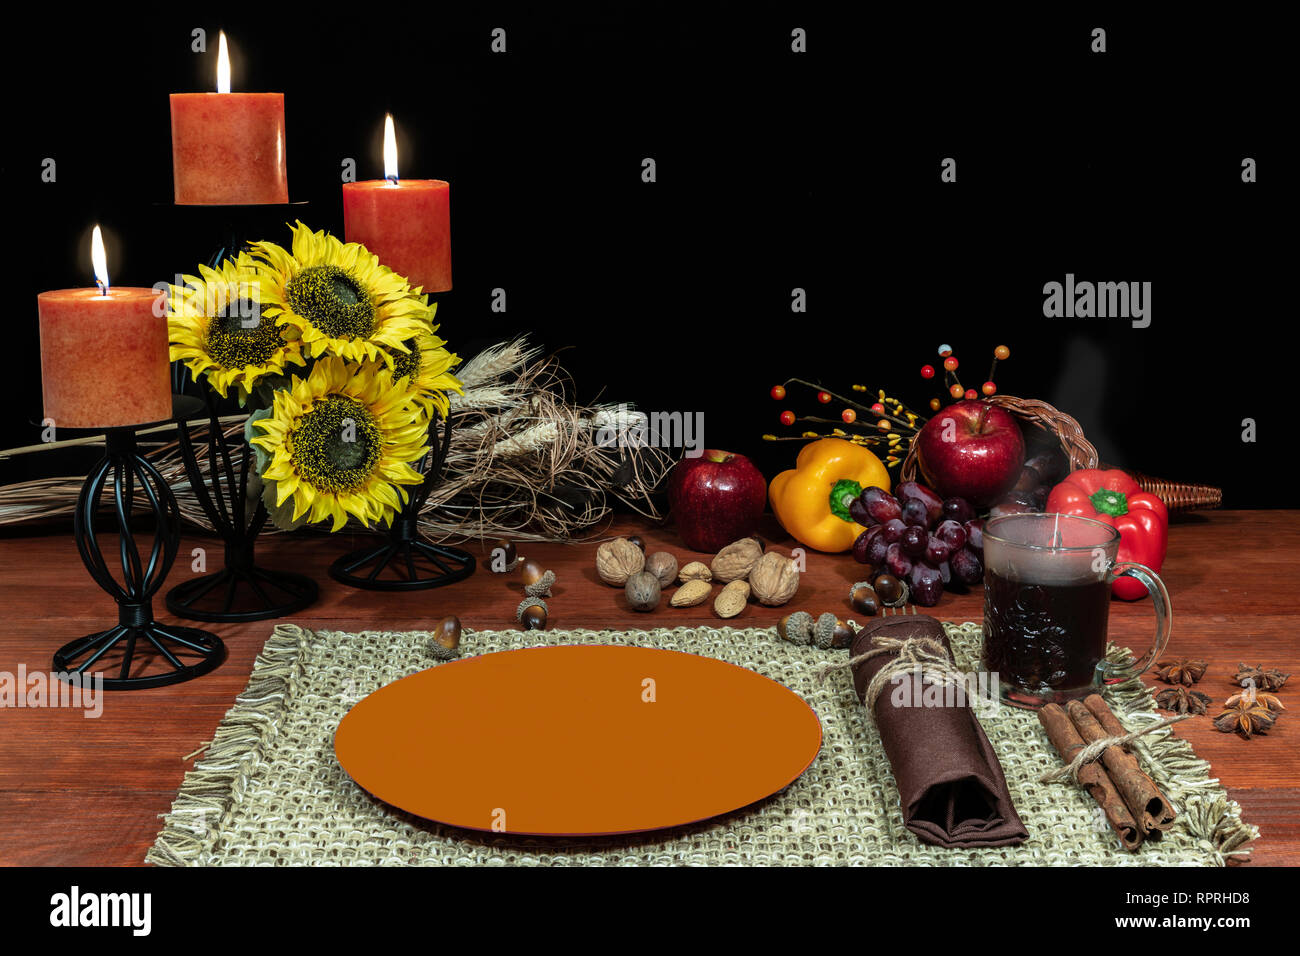 Thanksgiving setting for one with candle light, fruit, vegetables, hot tea, and sunflowers with cinnamon sticks and anise. Stock Photo